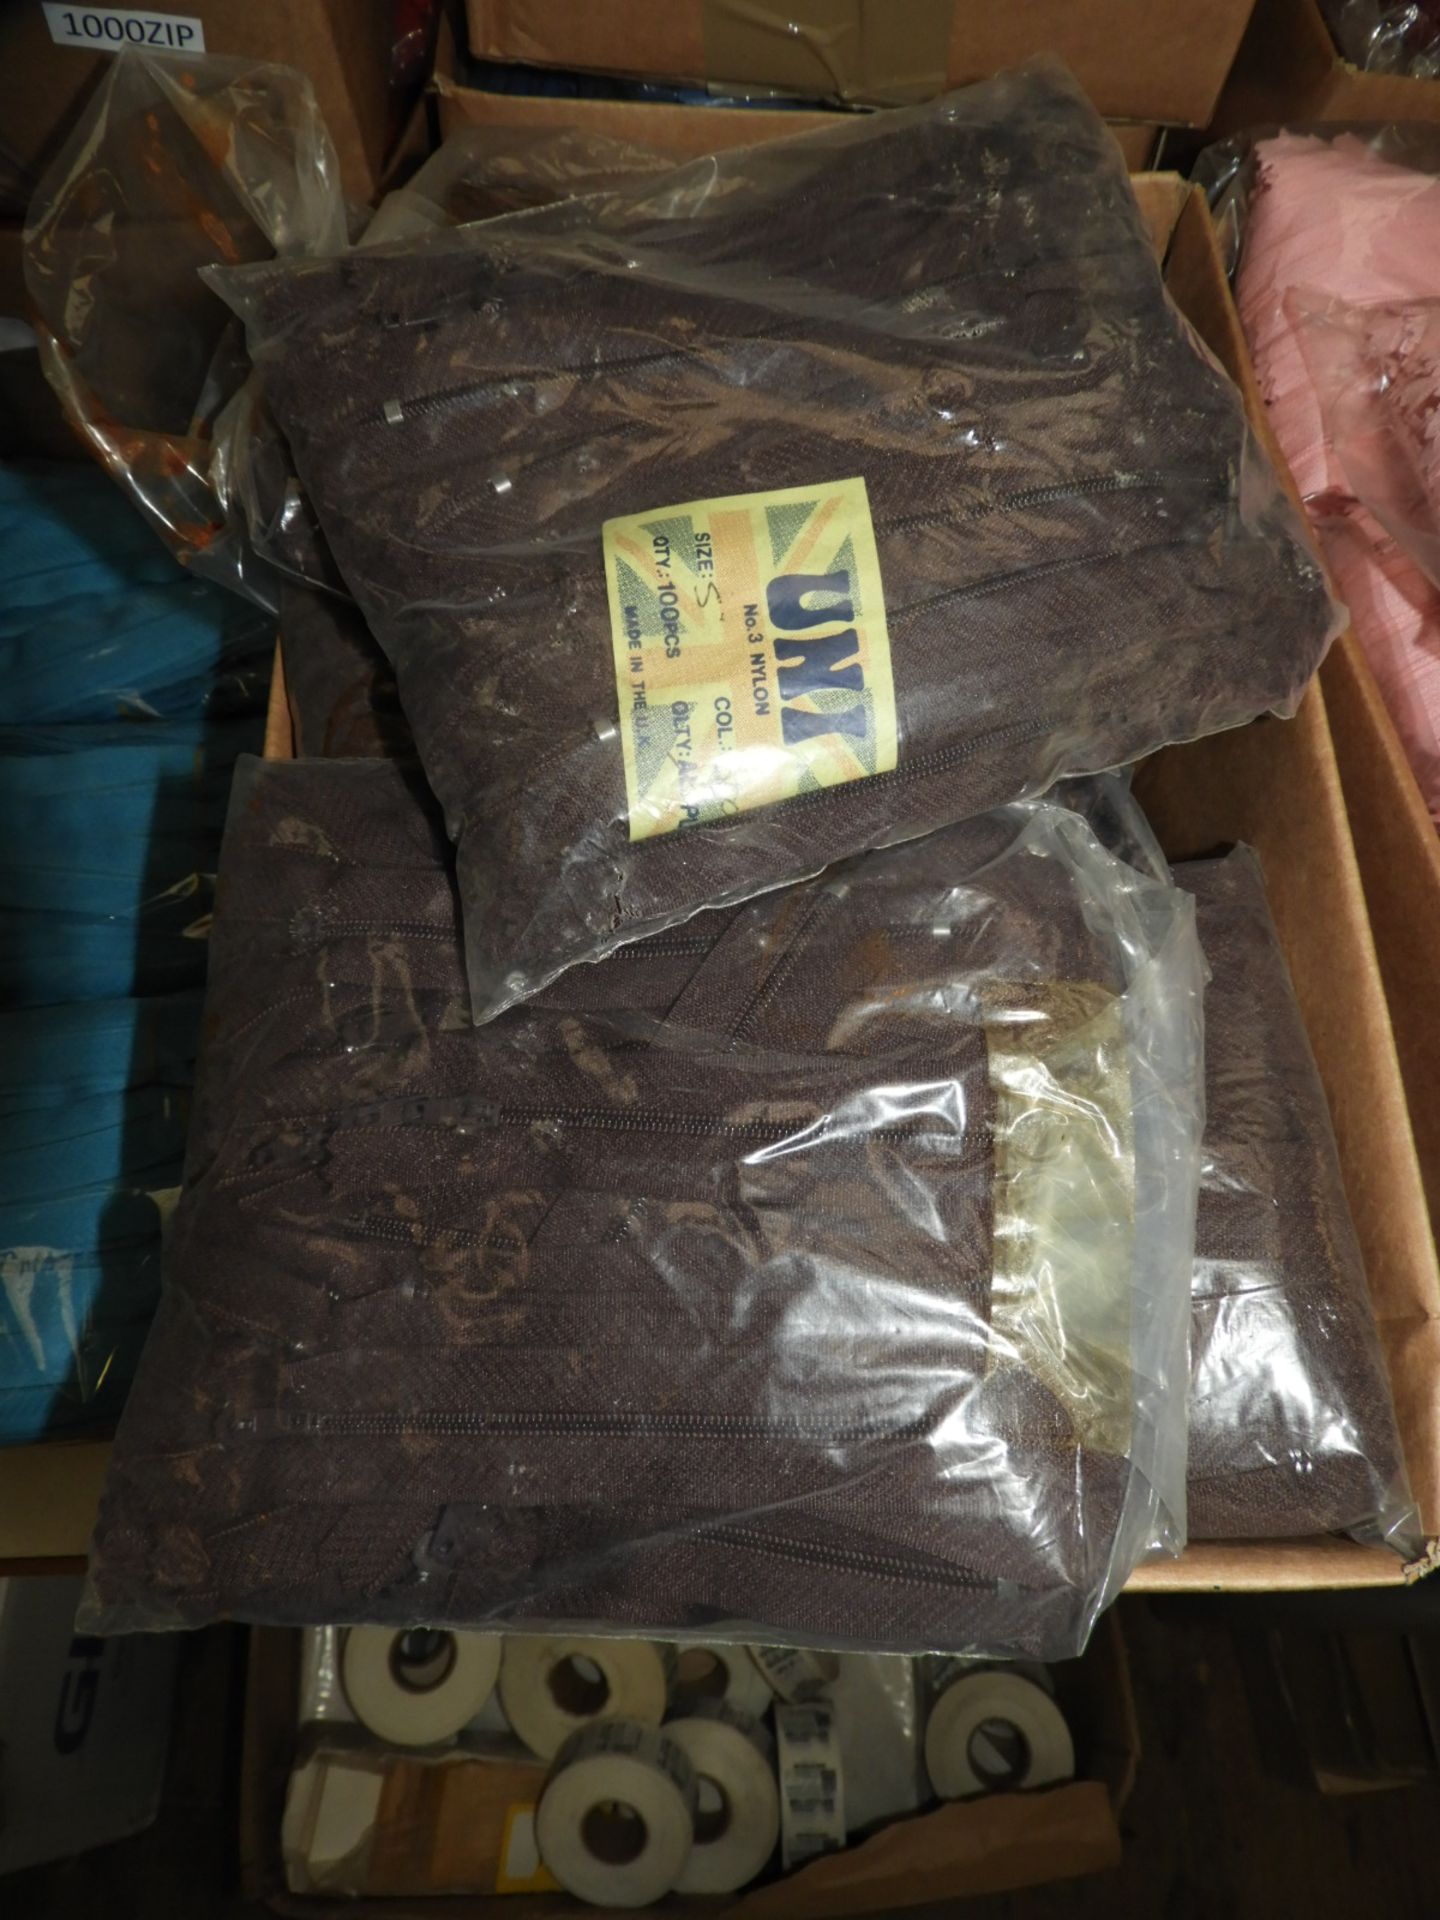 Box Containing 1000 Brown 6" Zips